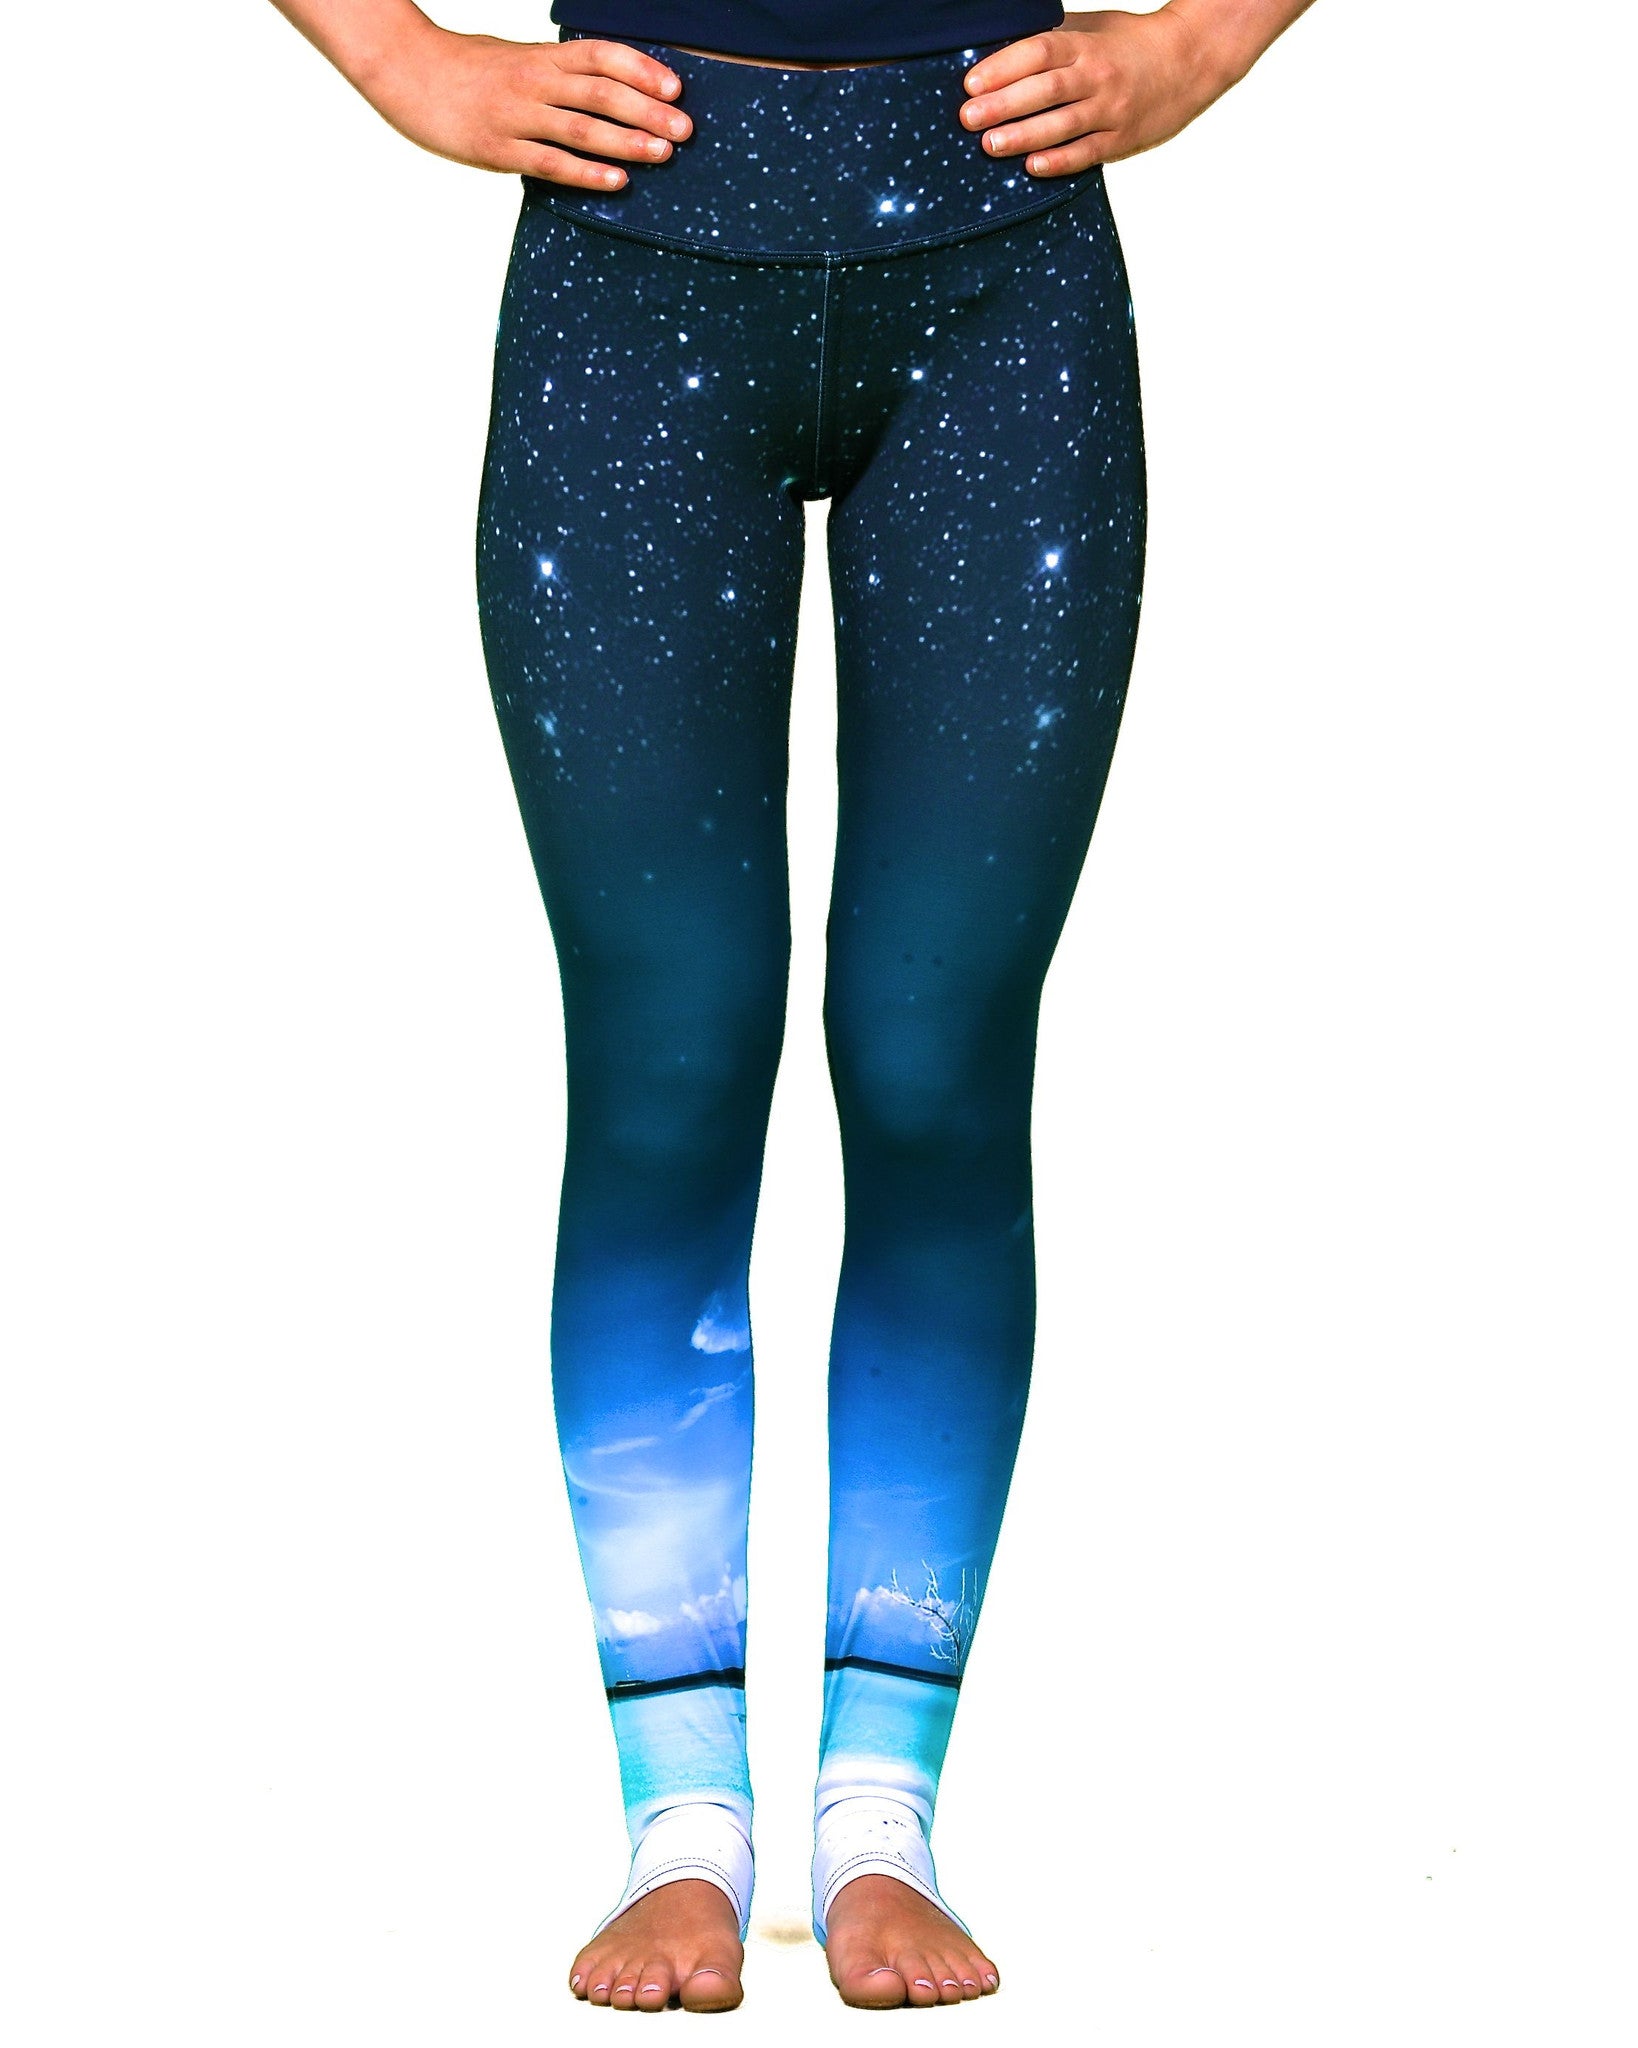 Alaric and hope training Leggings for Sale by crystalguo